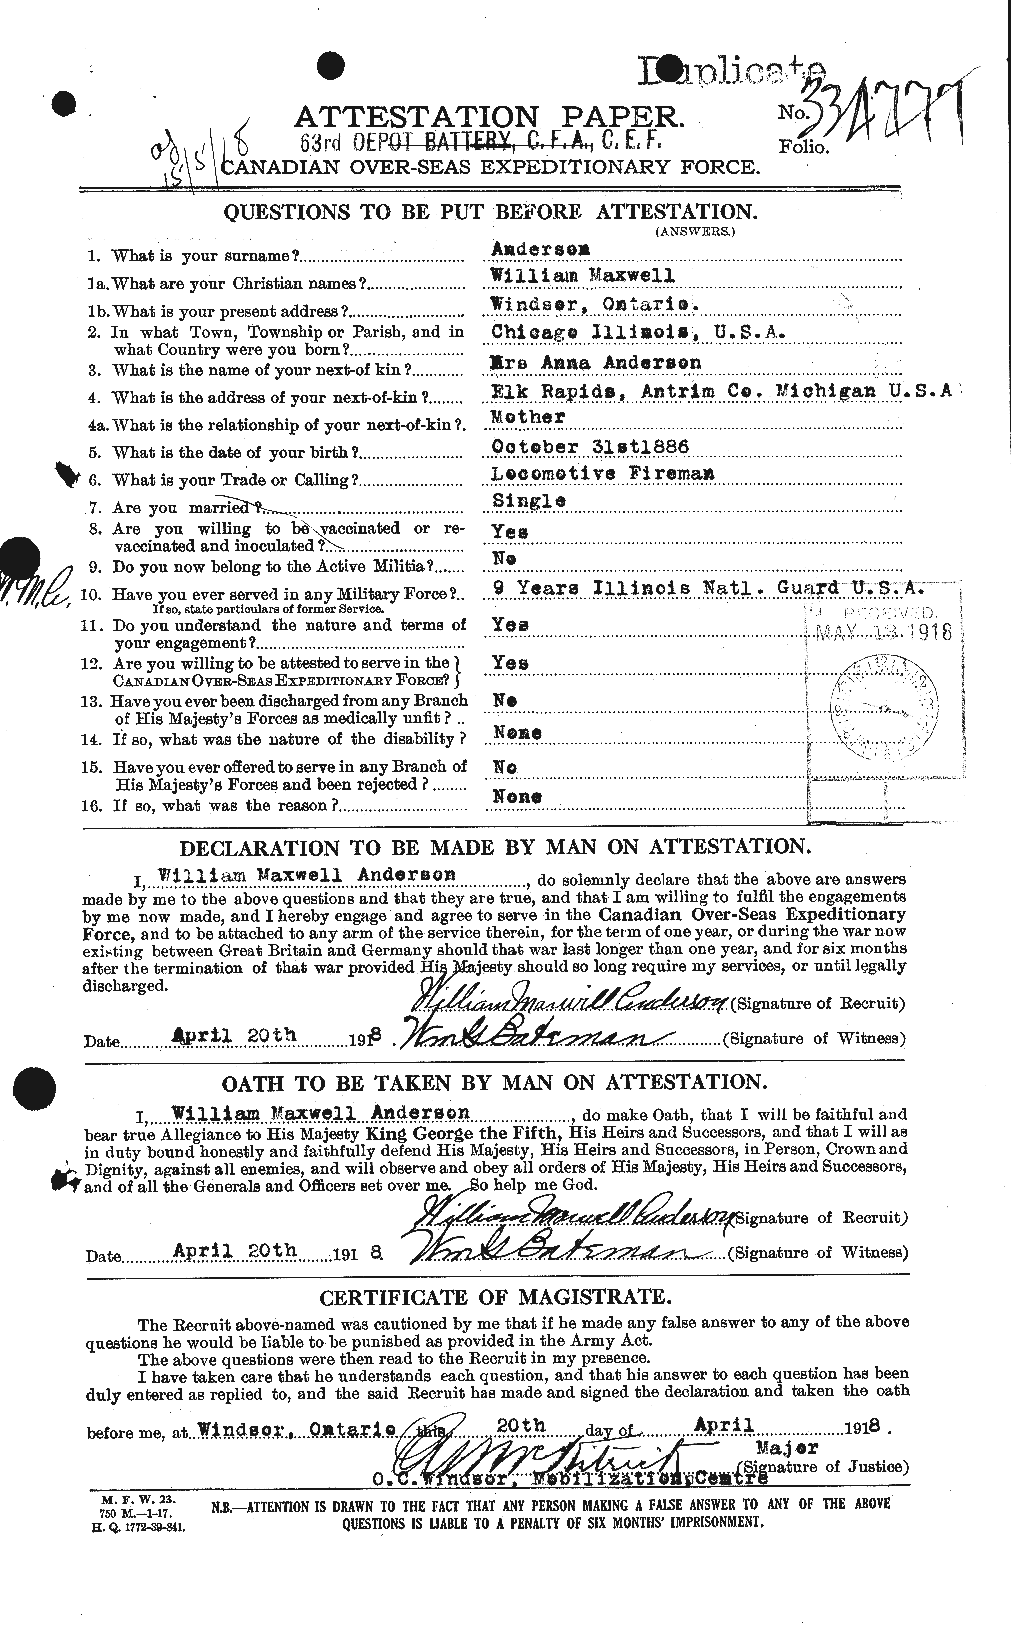 Personnel Records of the First World War - CEF 210832a